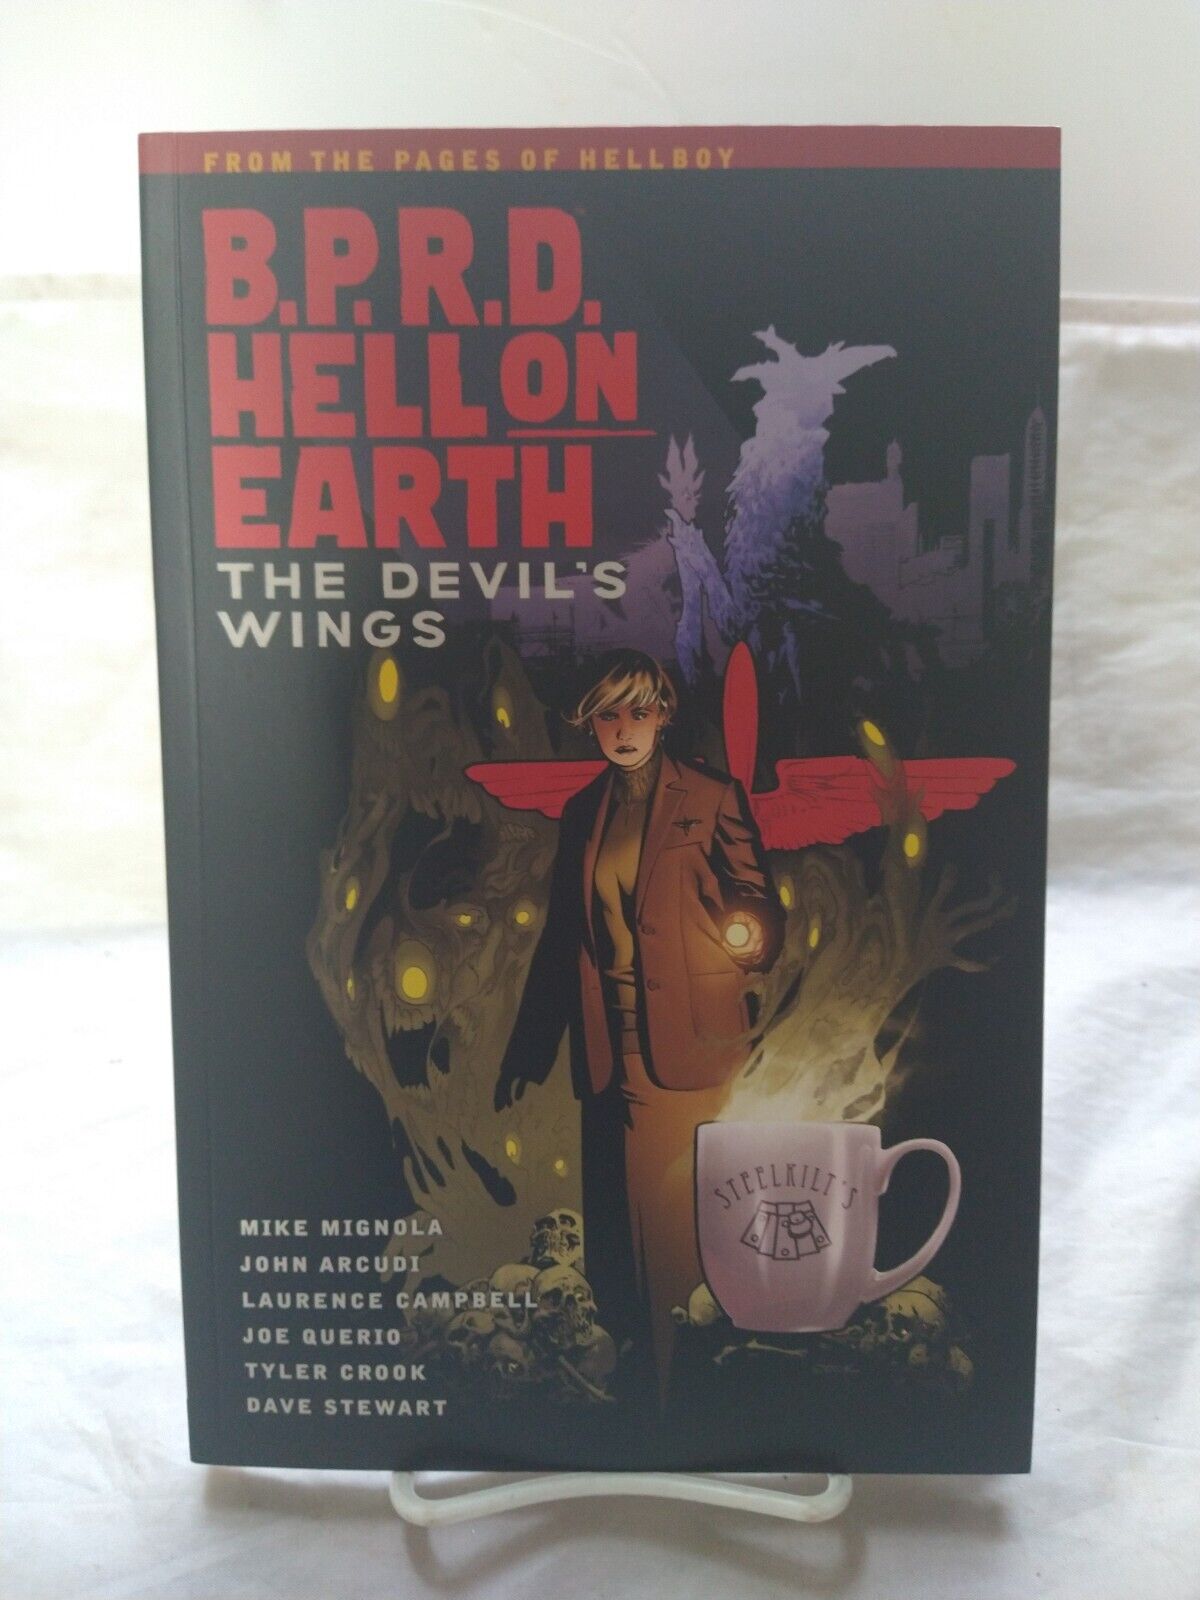 B.P.R.D. Hell on Earth - The Devil's Wings Trade Paperback Mike Mignoal